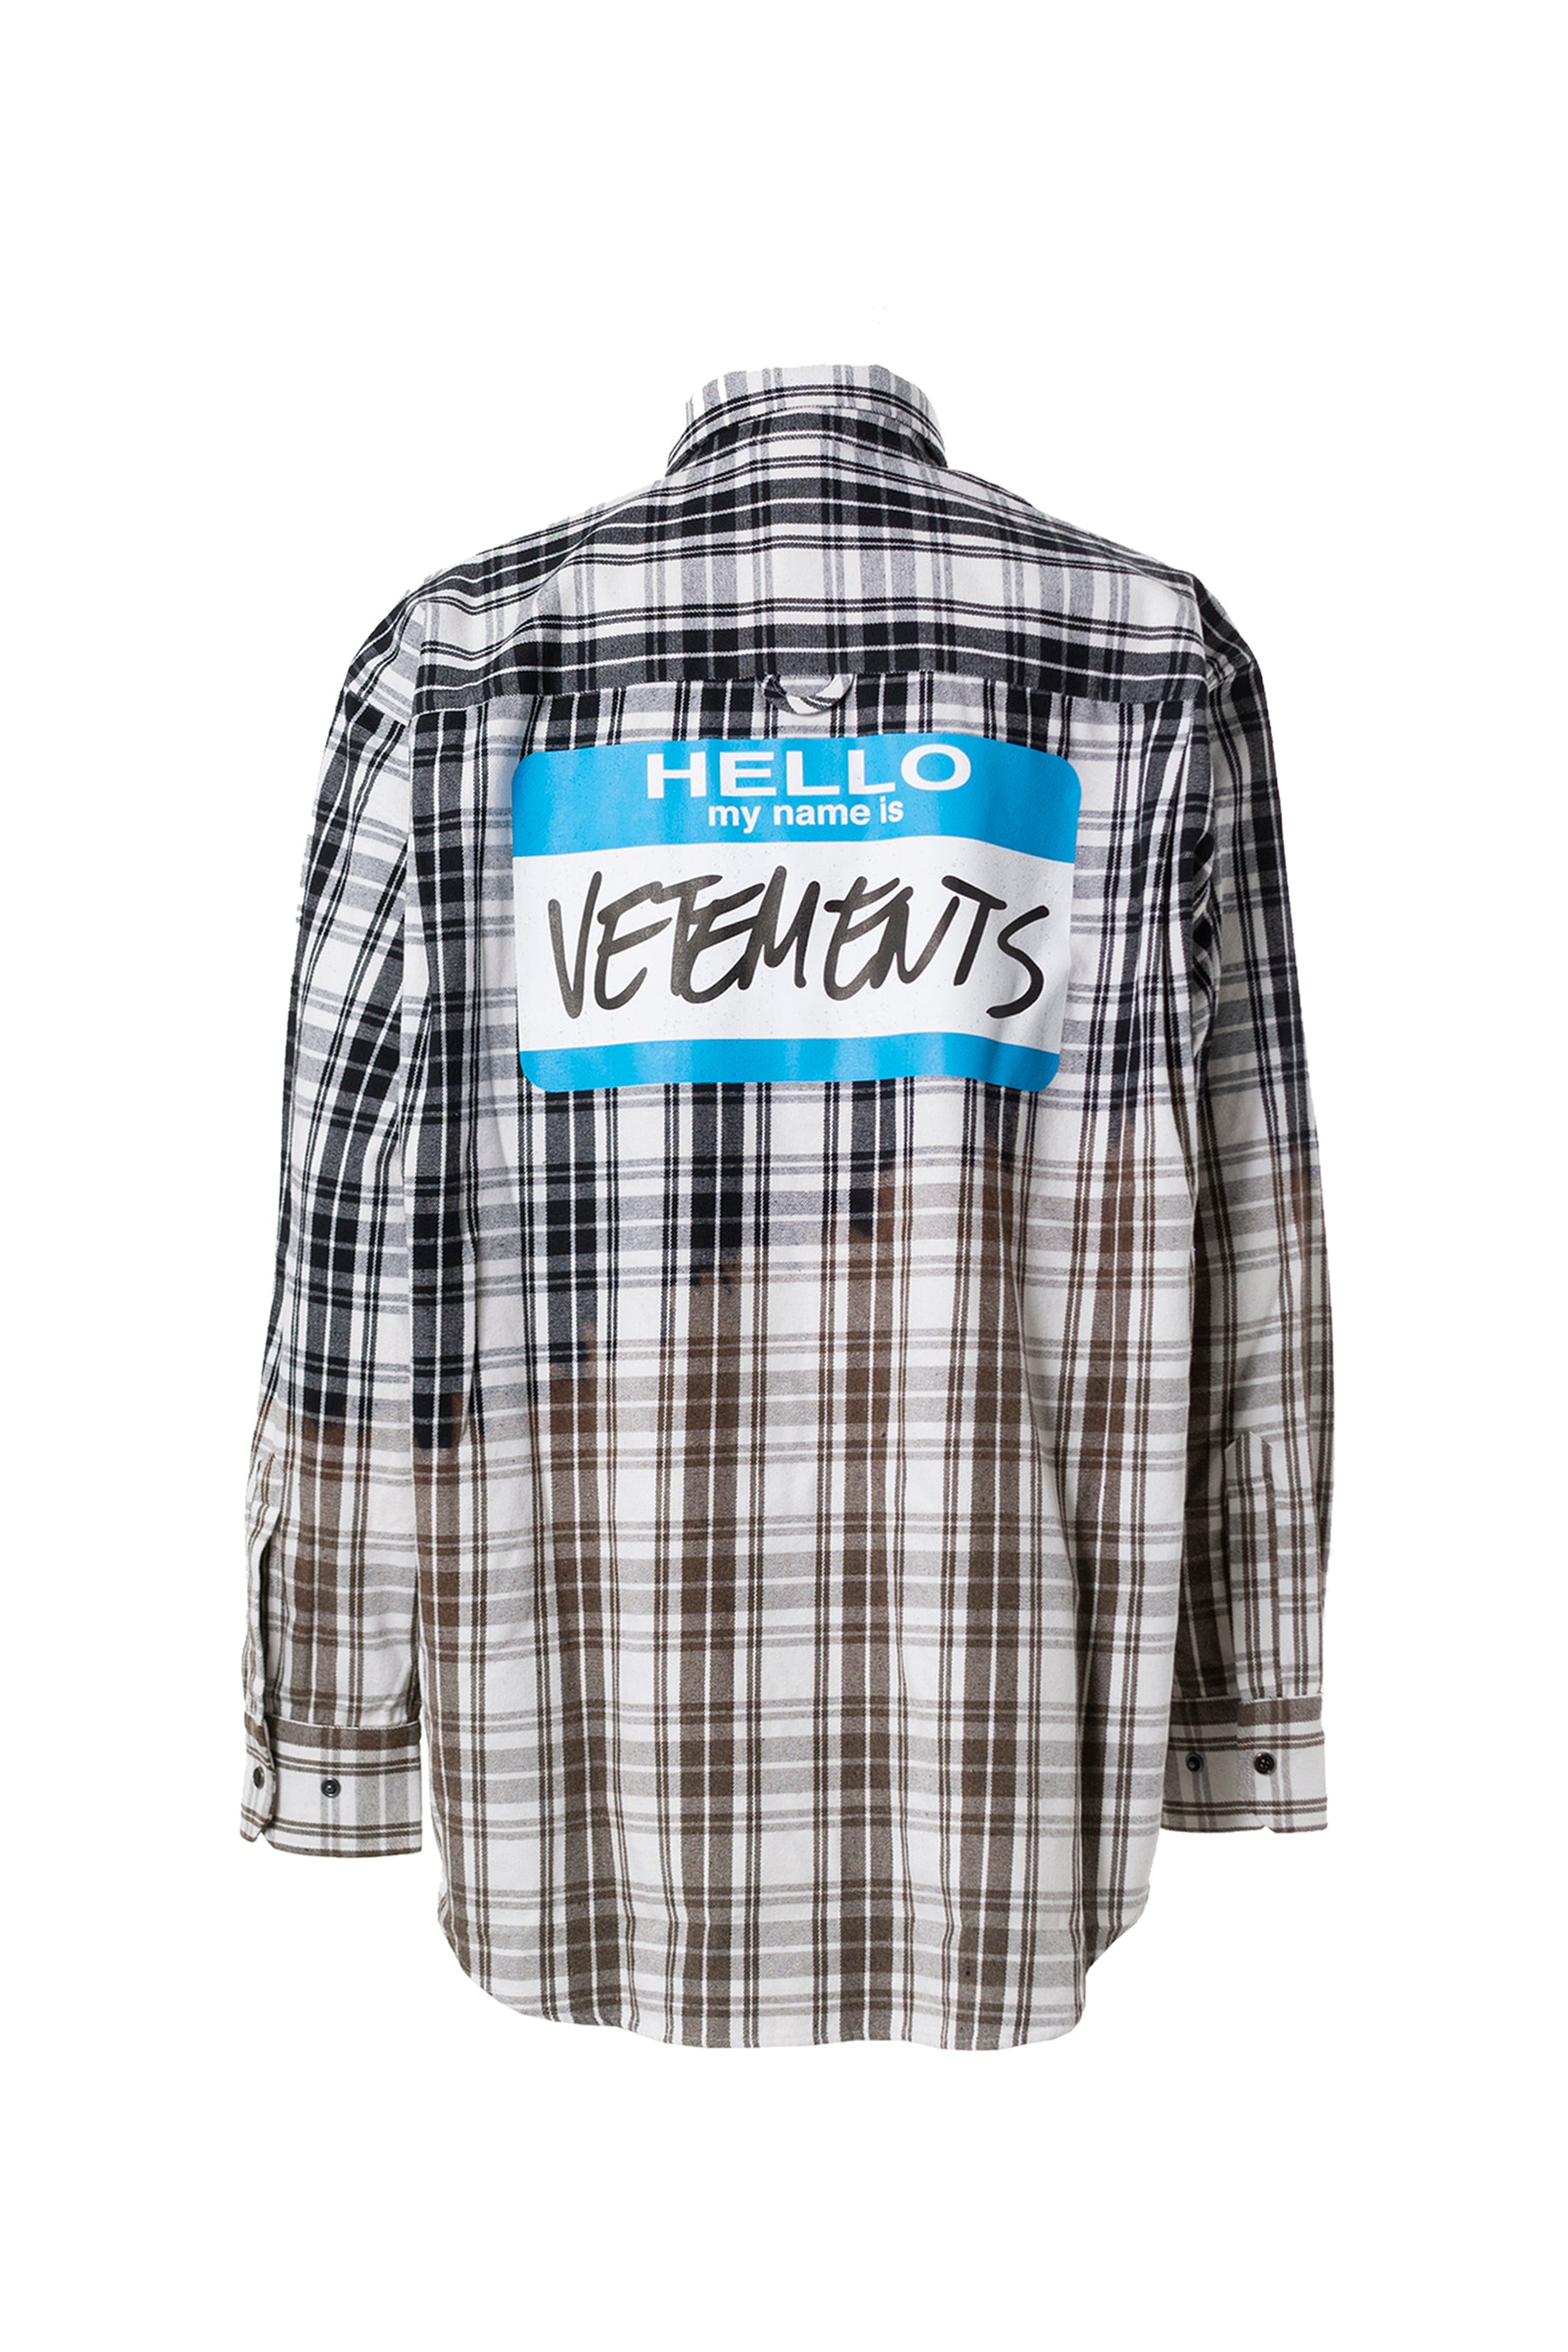 VETEMENTS ヴェトモン SS23 BLEACHED MY NAME IS VETEMENTS FLANNEL